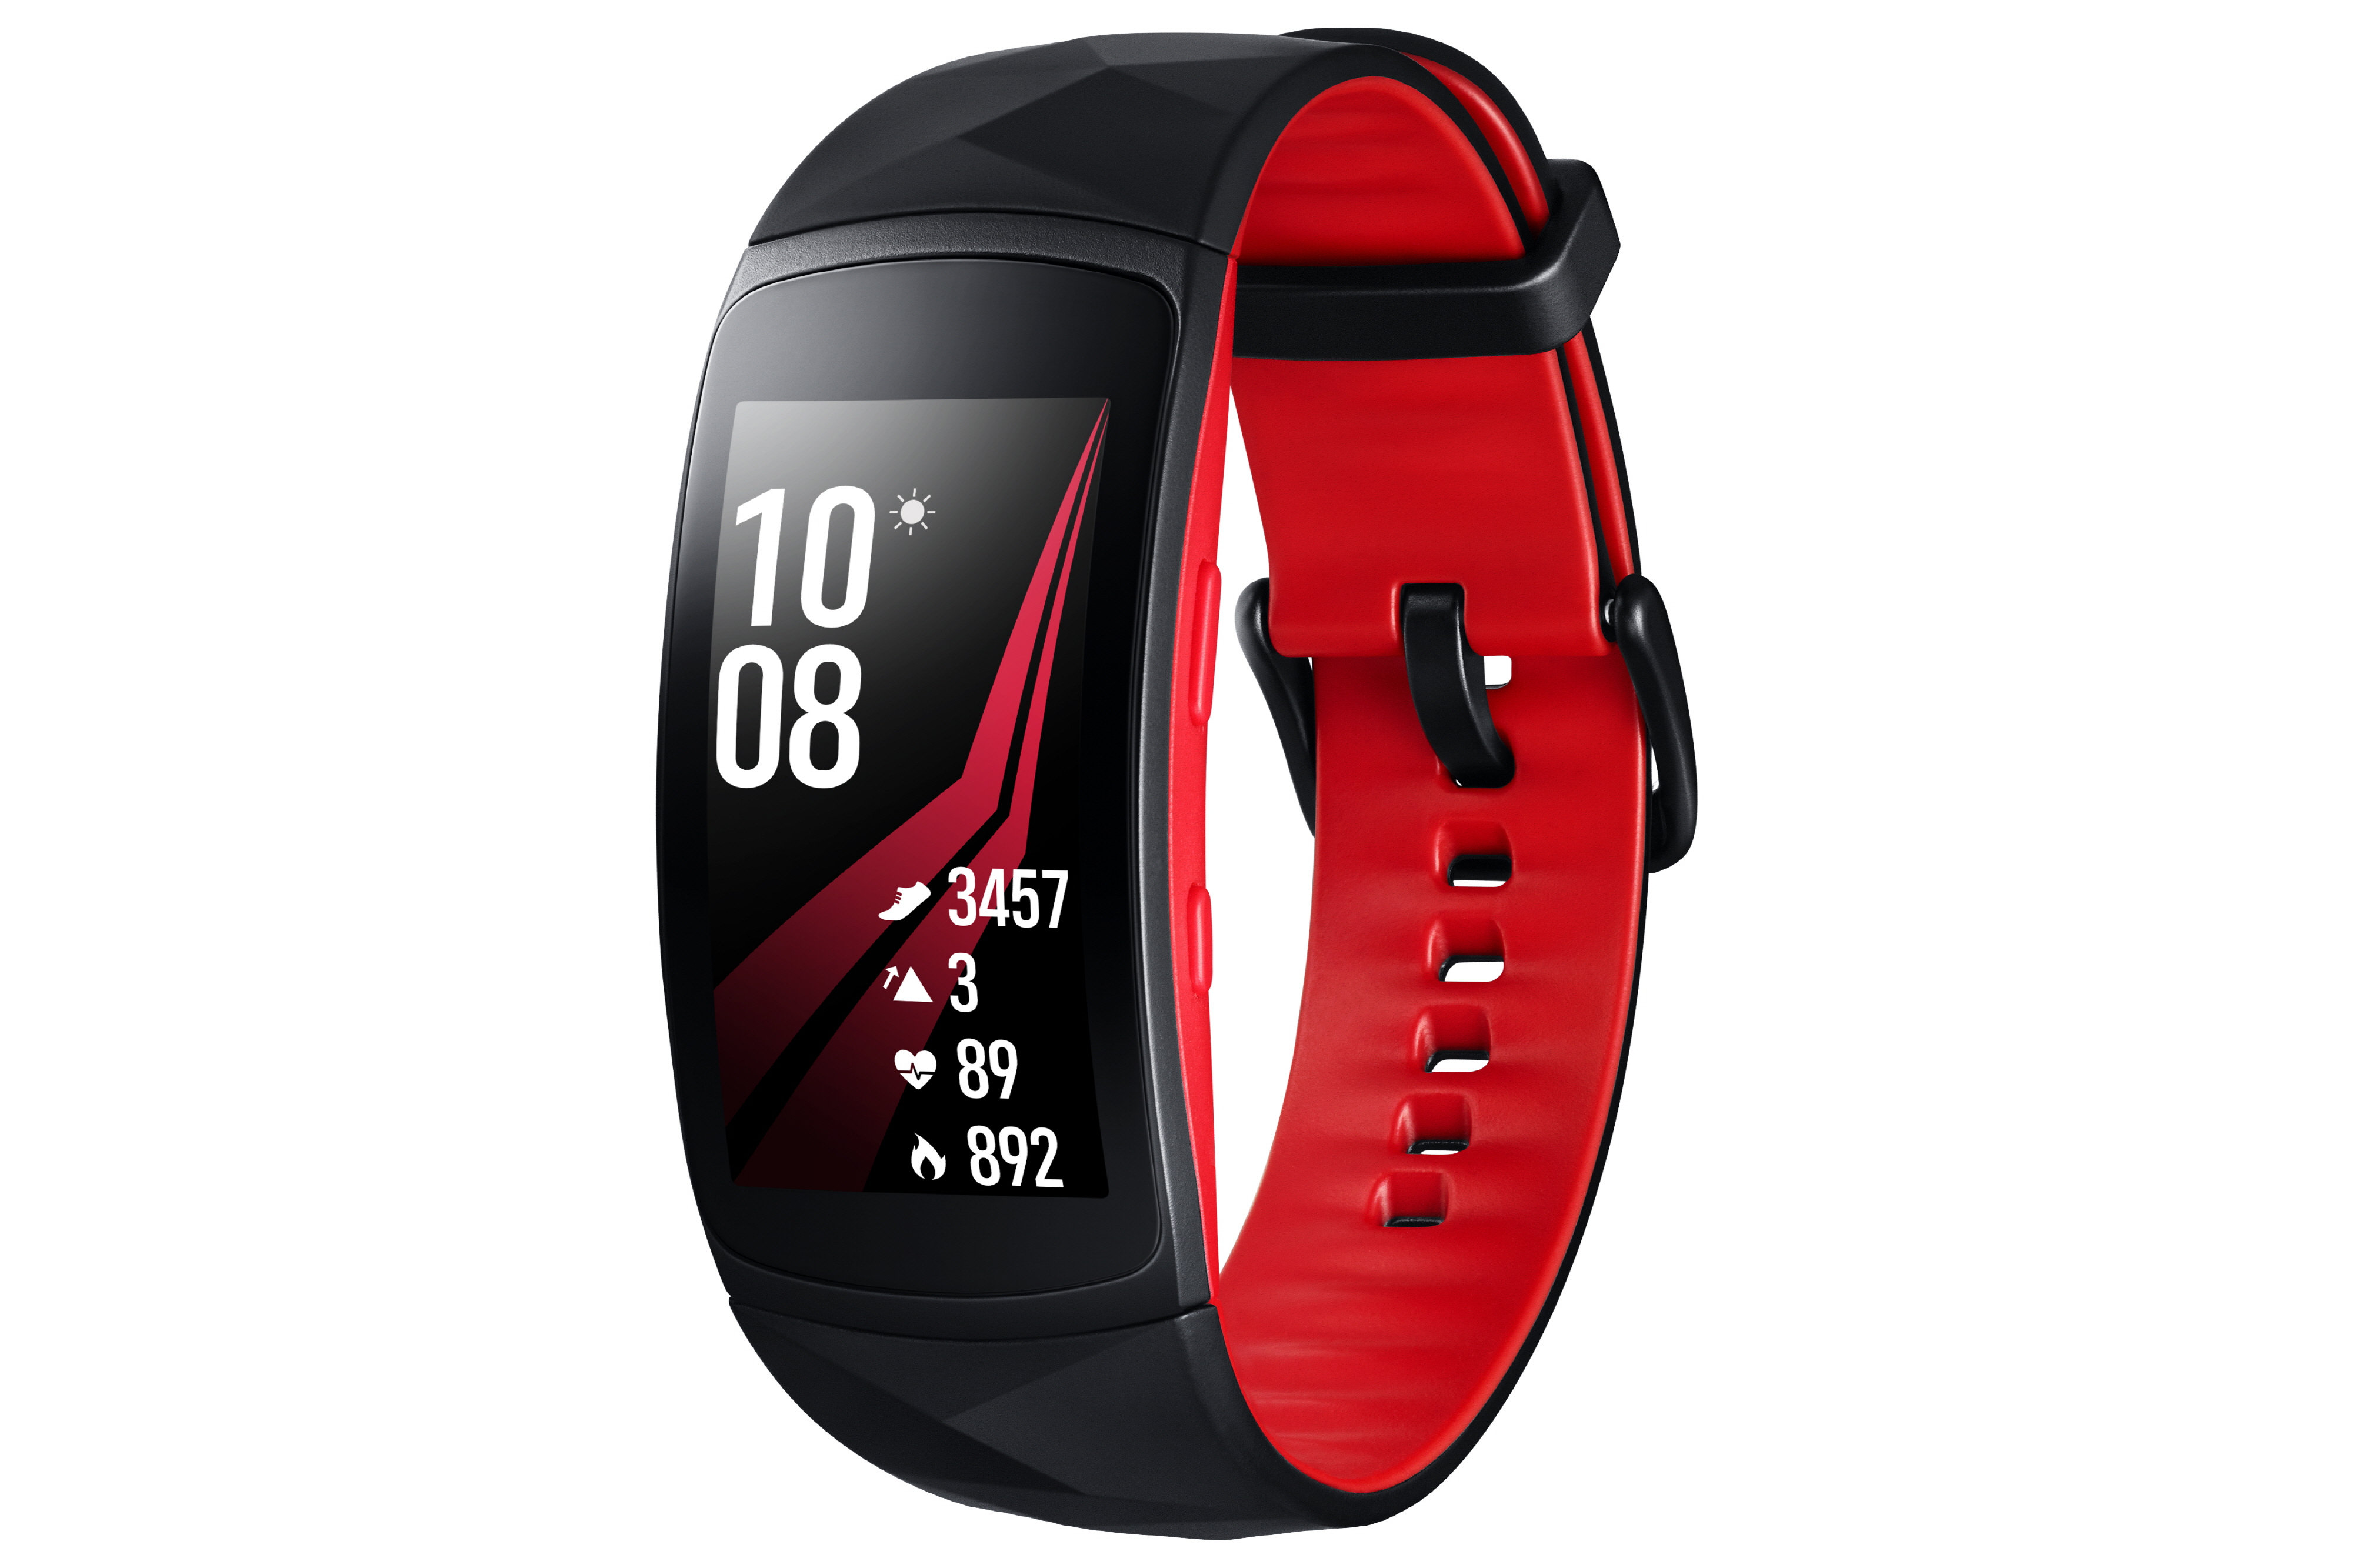 Гелакси фит. Samsung Gear fit2 Pro. Фитнес-браслет Samsung Gear Fit 2 Pro. Фитнес браслет самсунг Gear Fit 2 Pro. Смарт браслет Samsung Galaxy Fit 2.